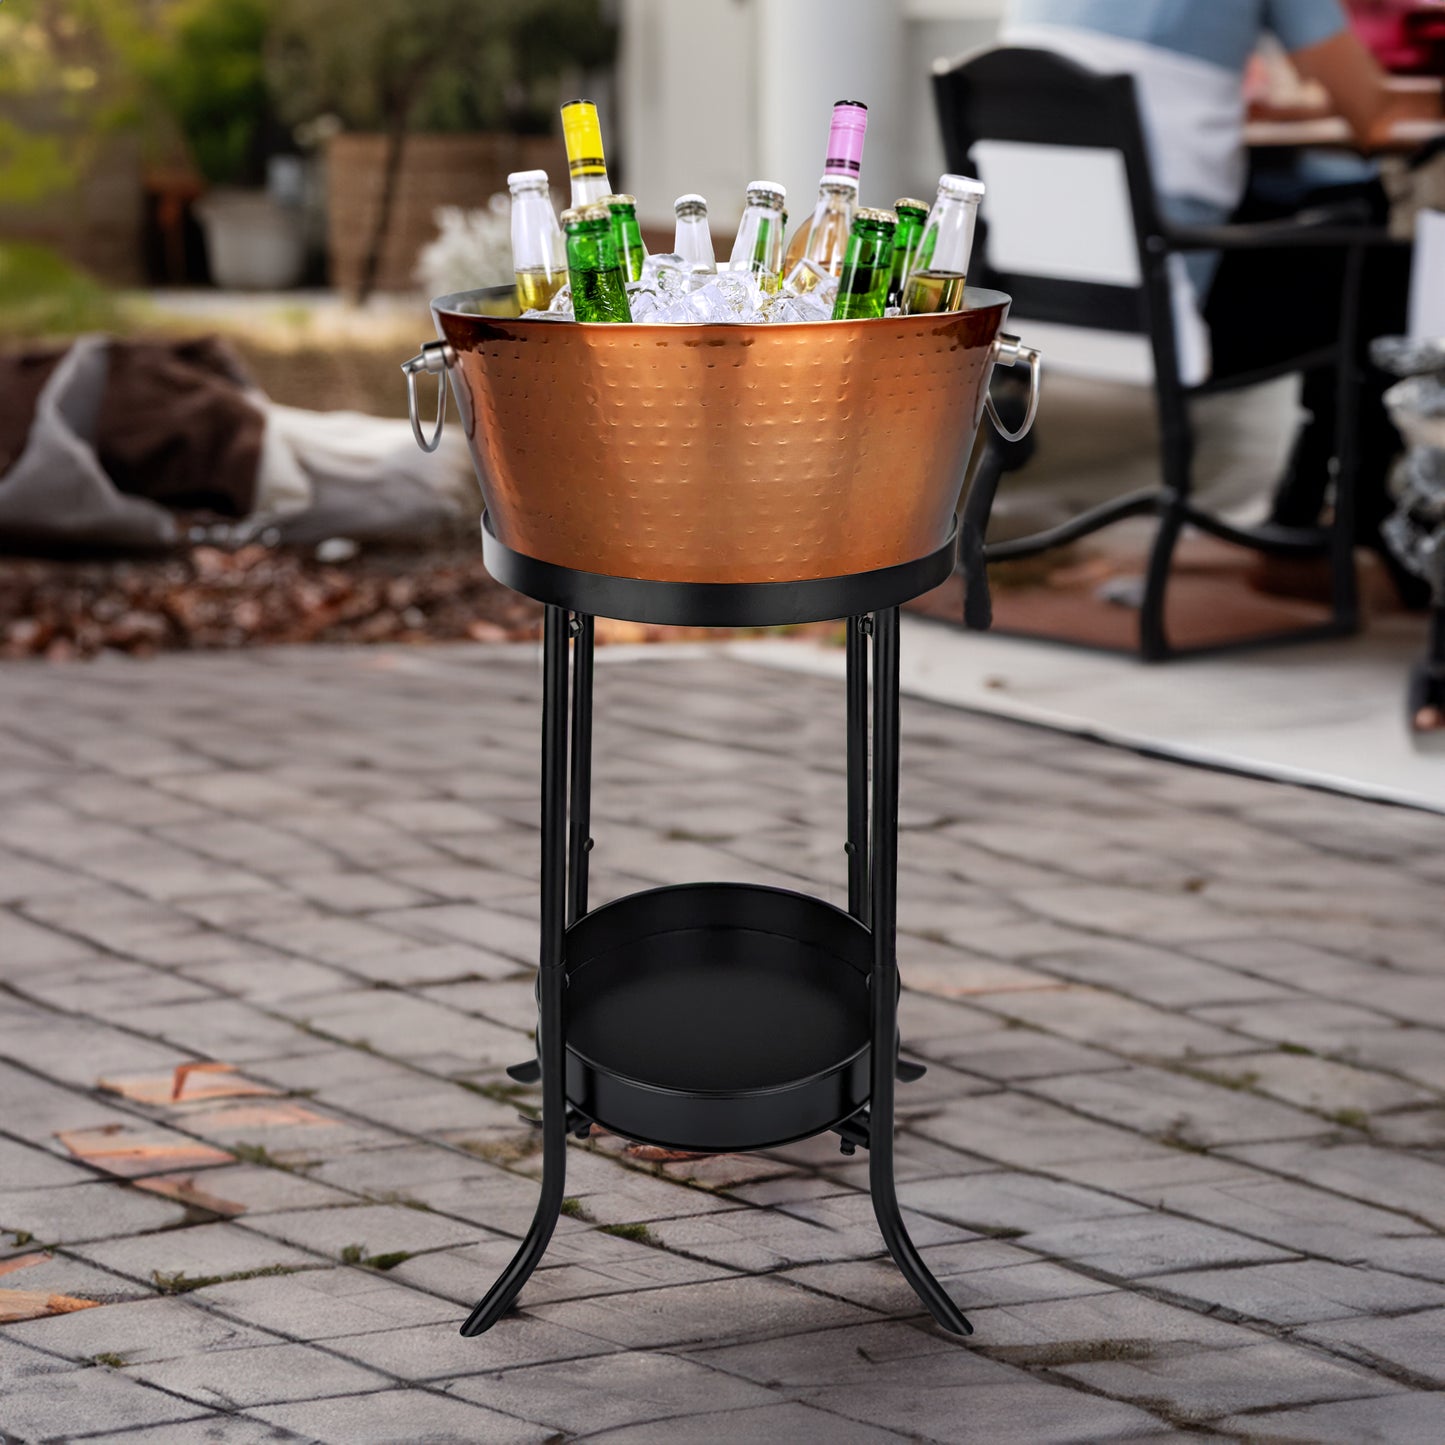 Personalized Insulated Rose Copper Beverage Bucket with Floor Stand - BREKX Hammered Anchored with Stand